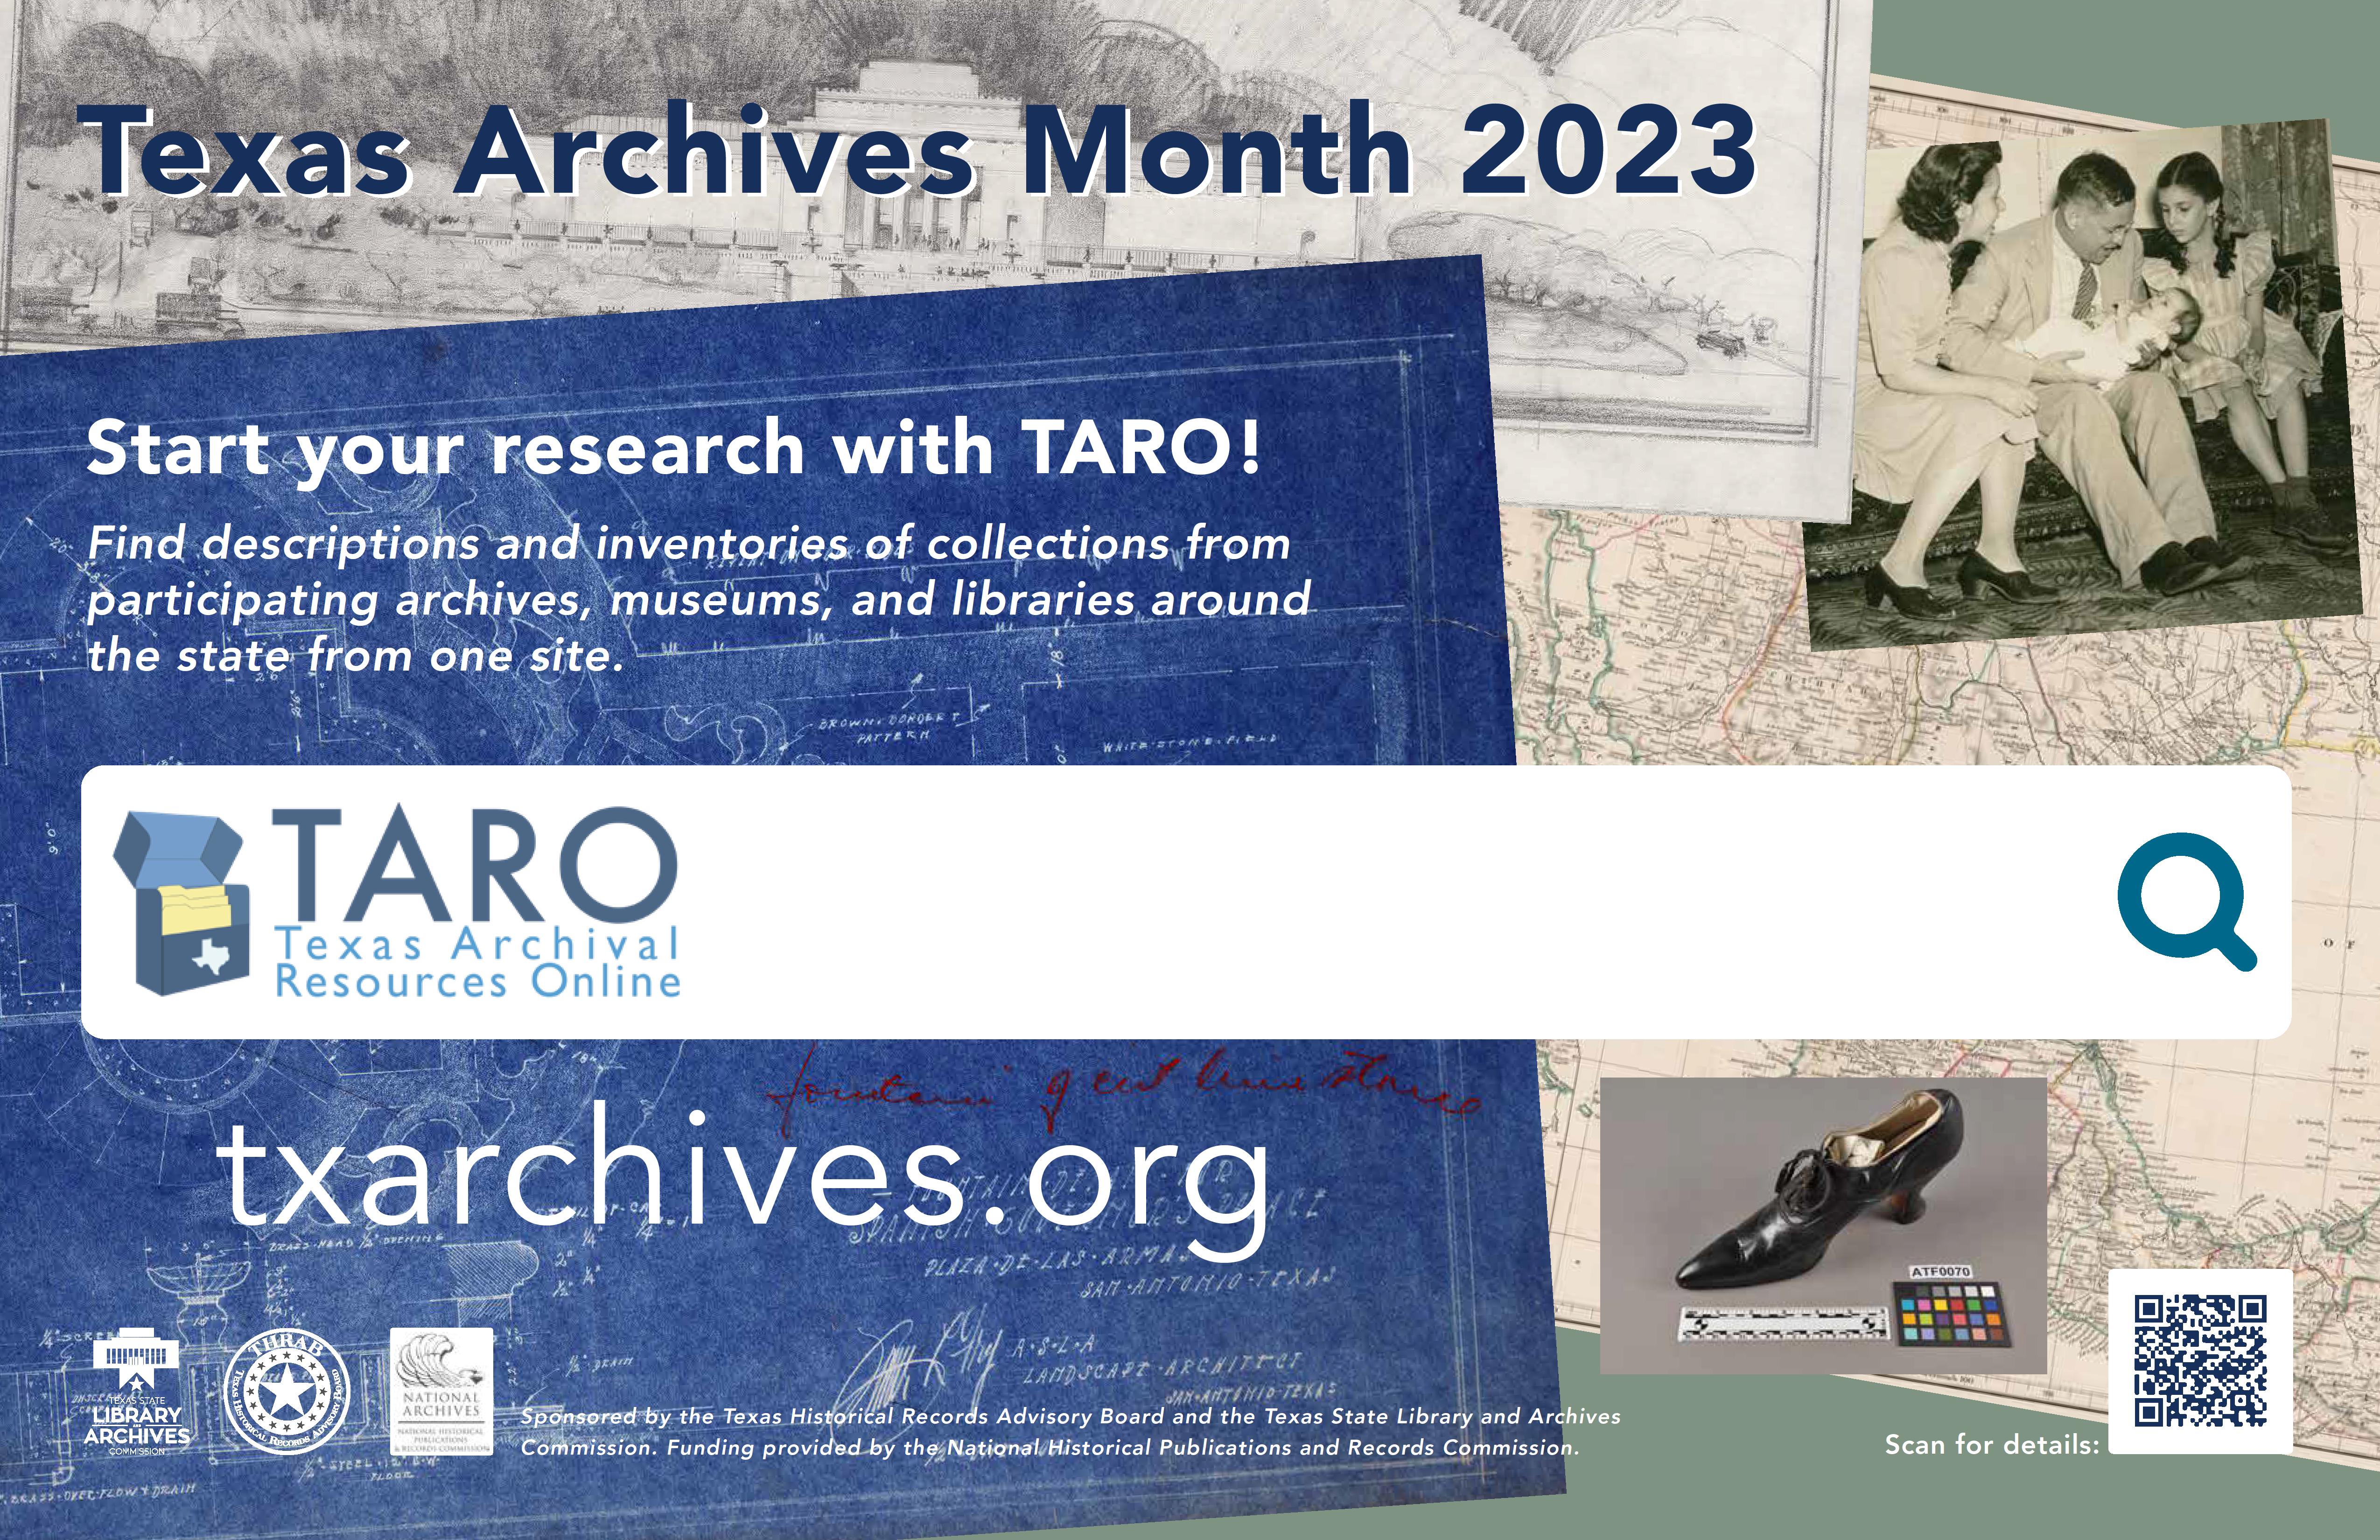 Archives Month and Texas Archival Resources Online